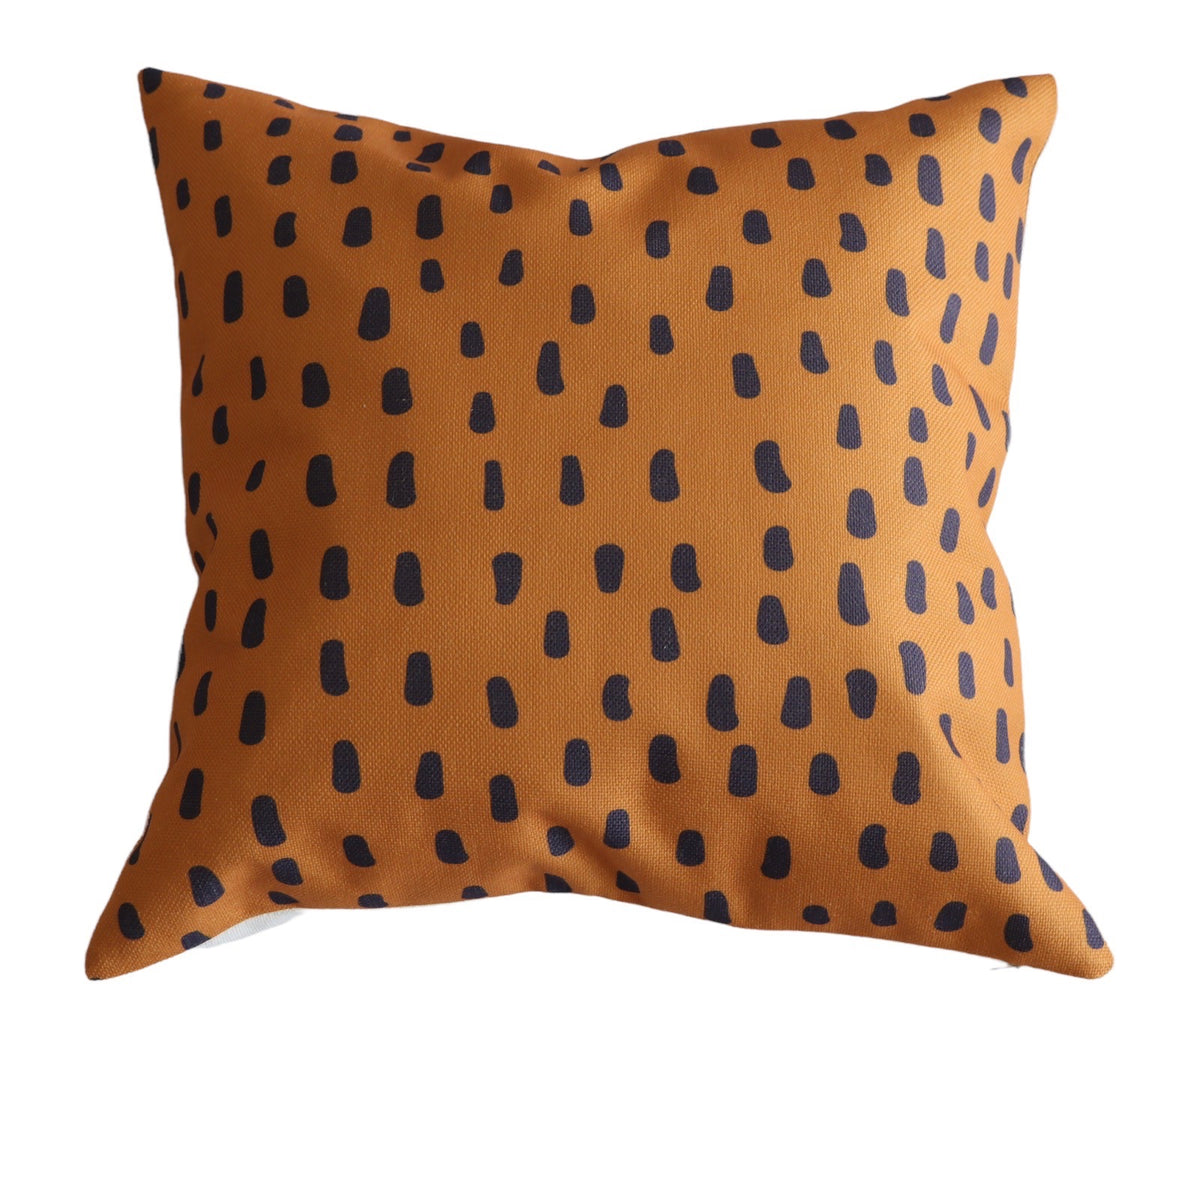 Show Me Your Spots Outdoor Throw Pillow Cover - Holistic Habitat 